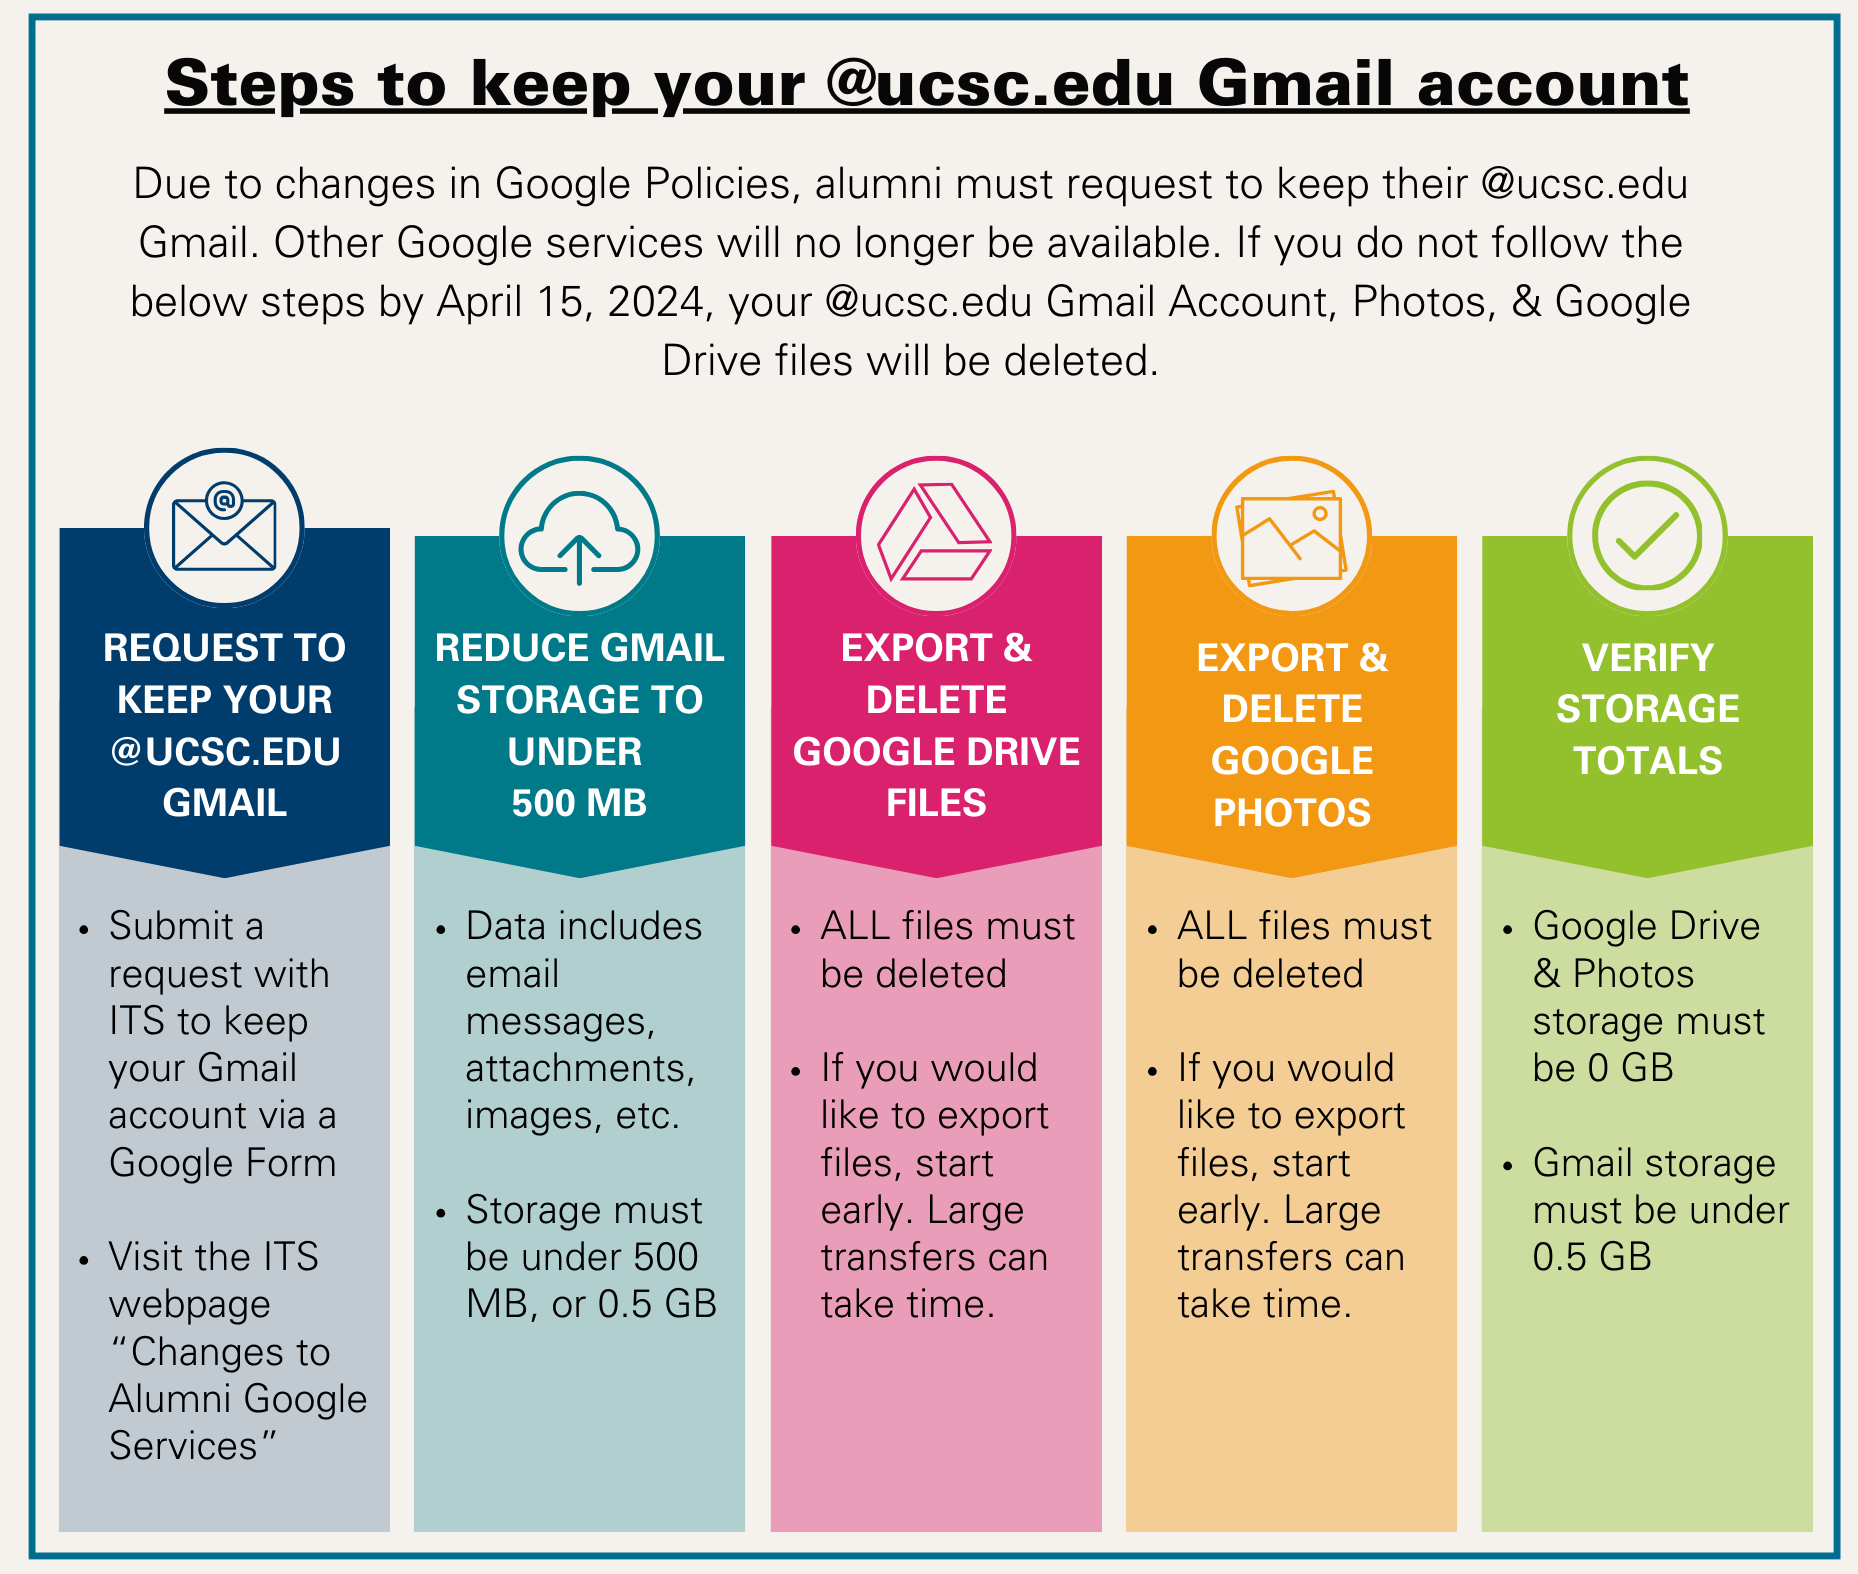 Steps to keep your UCSC Gmail account